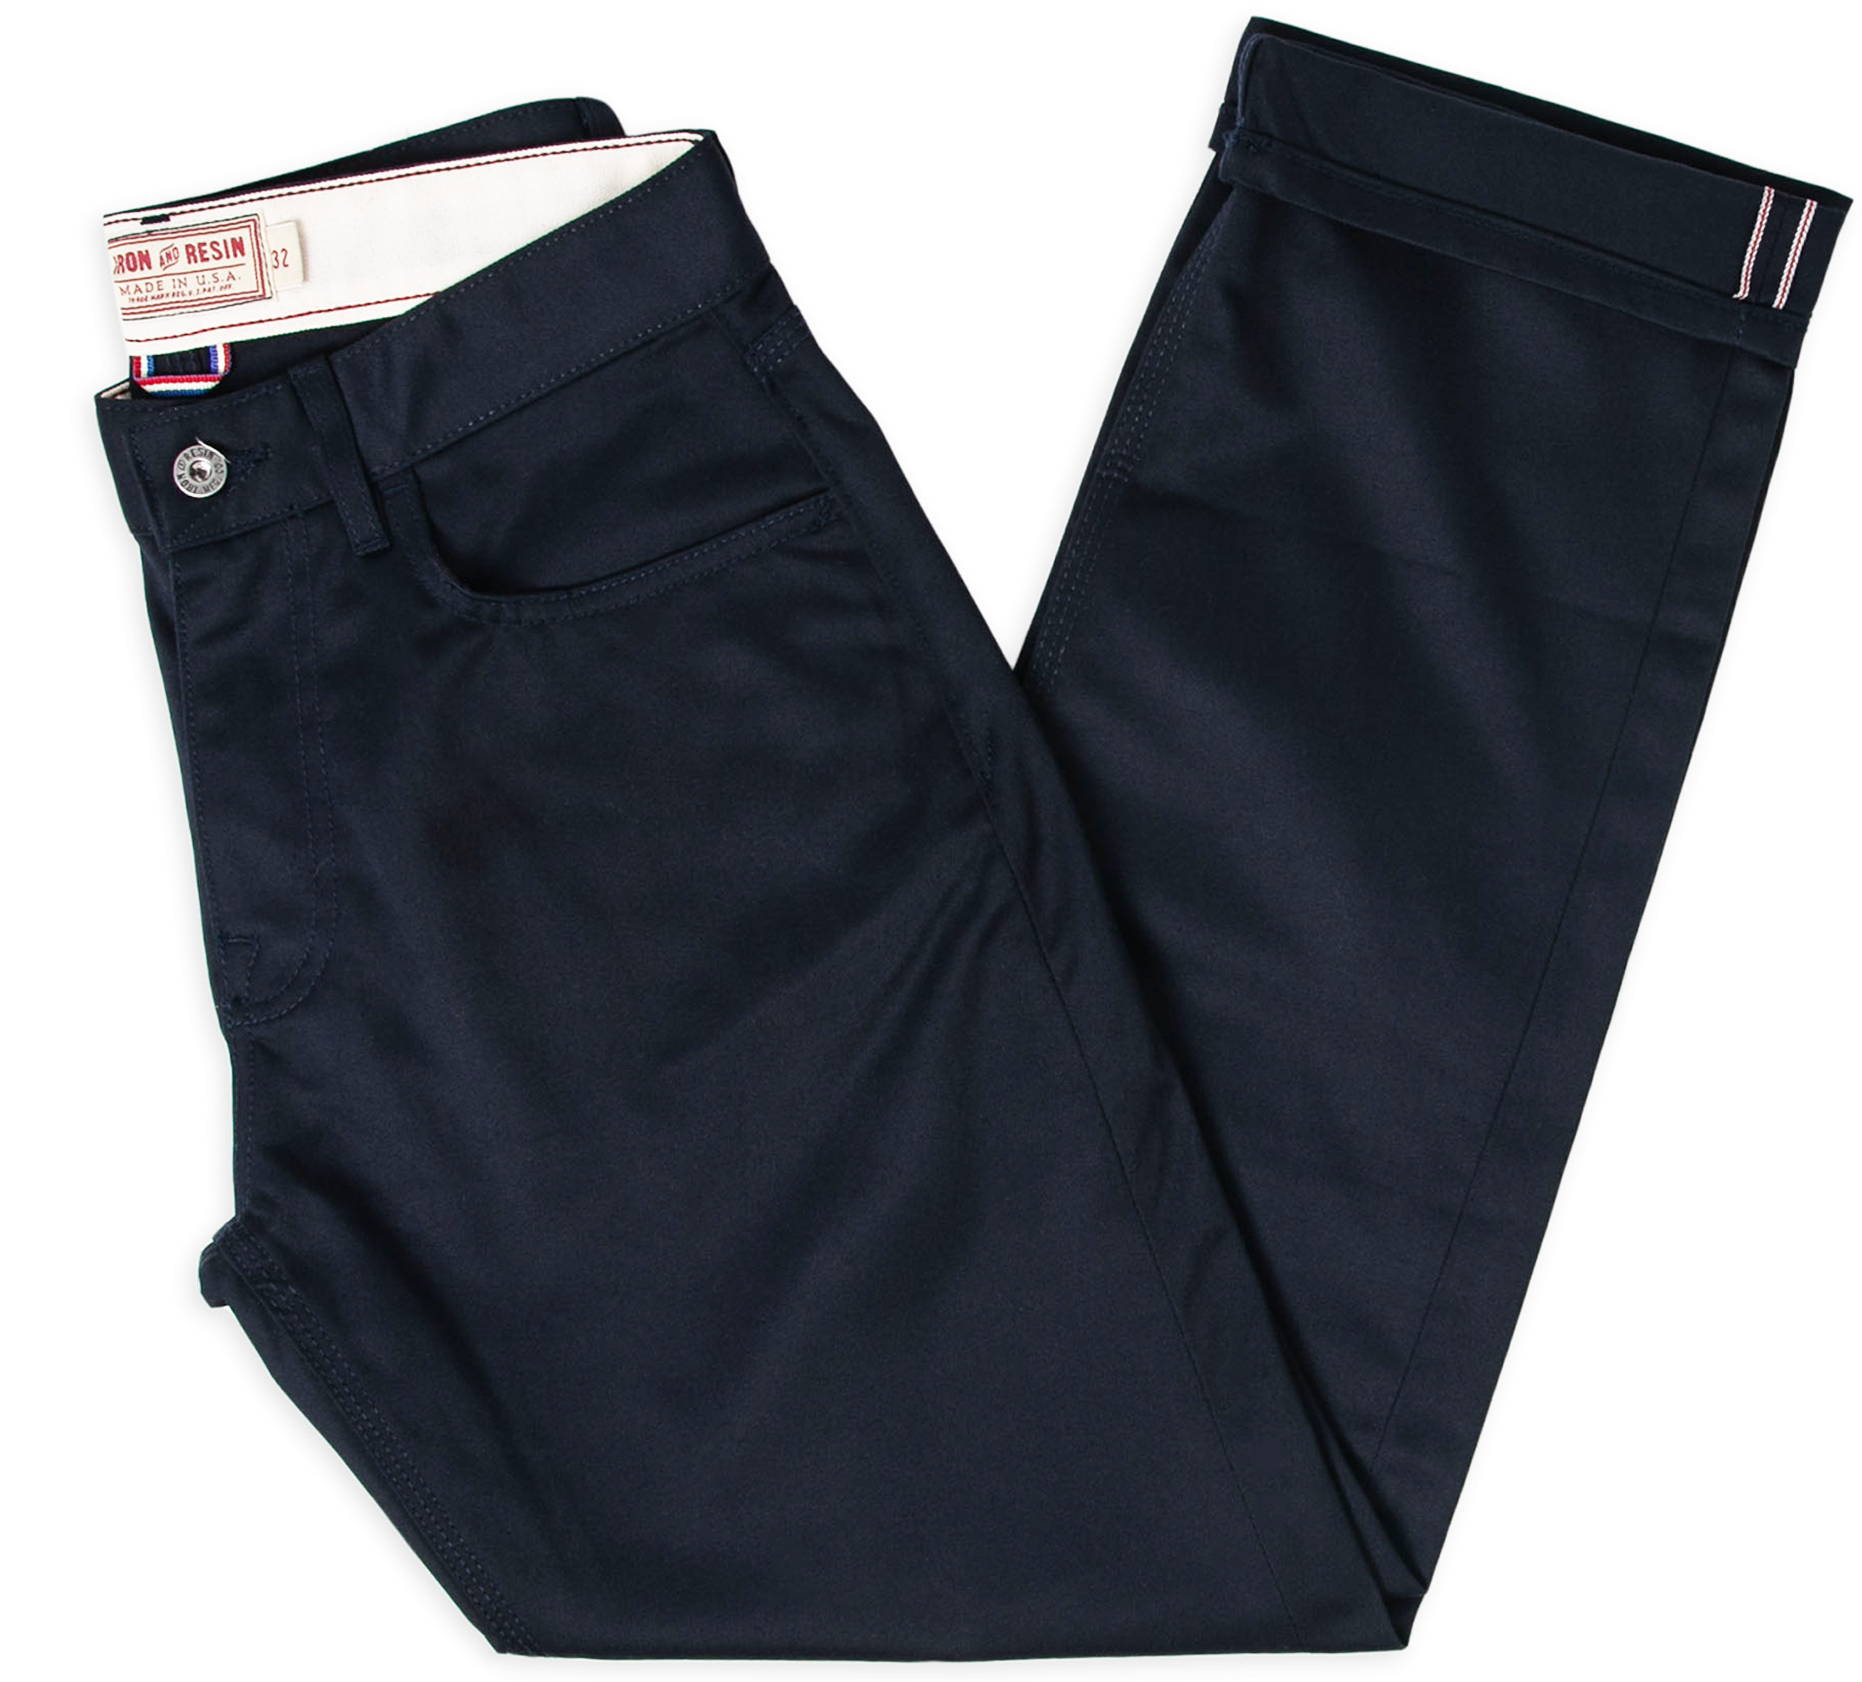 Iron & Resin Tradesman Pant in Navy Folded with Selvedge Twill Detail